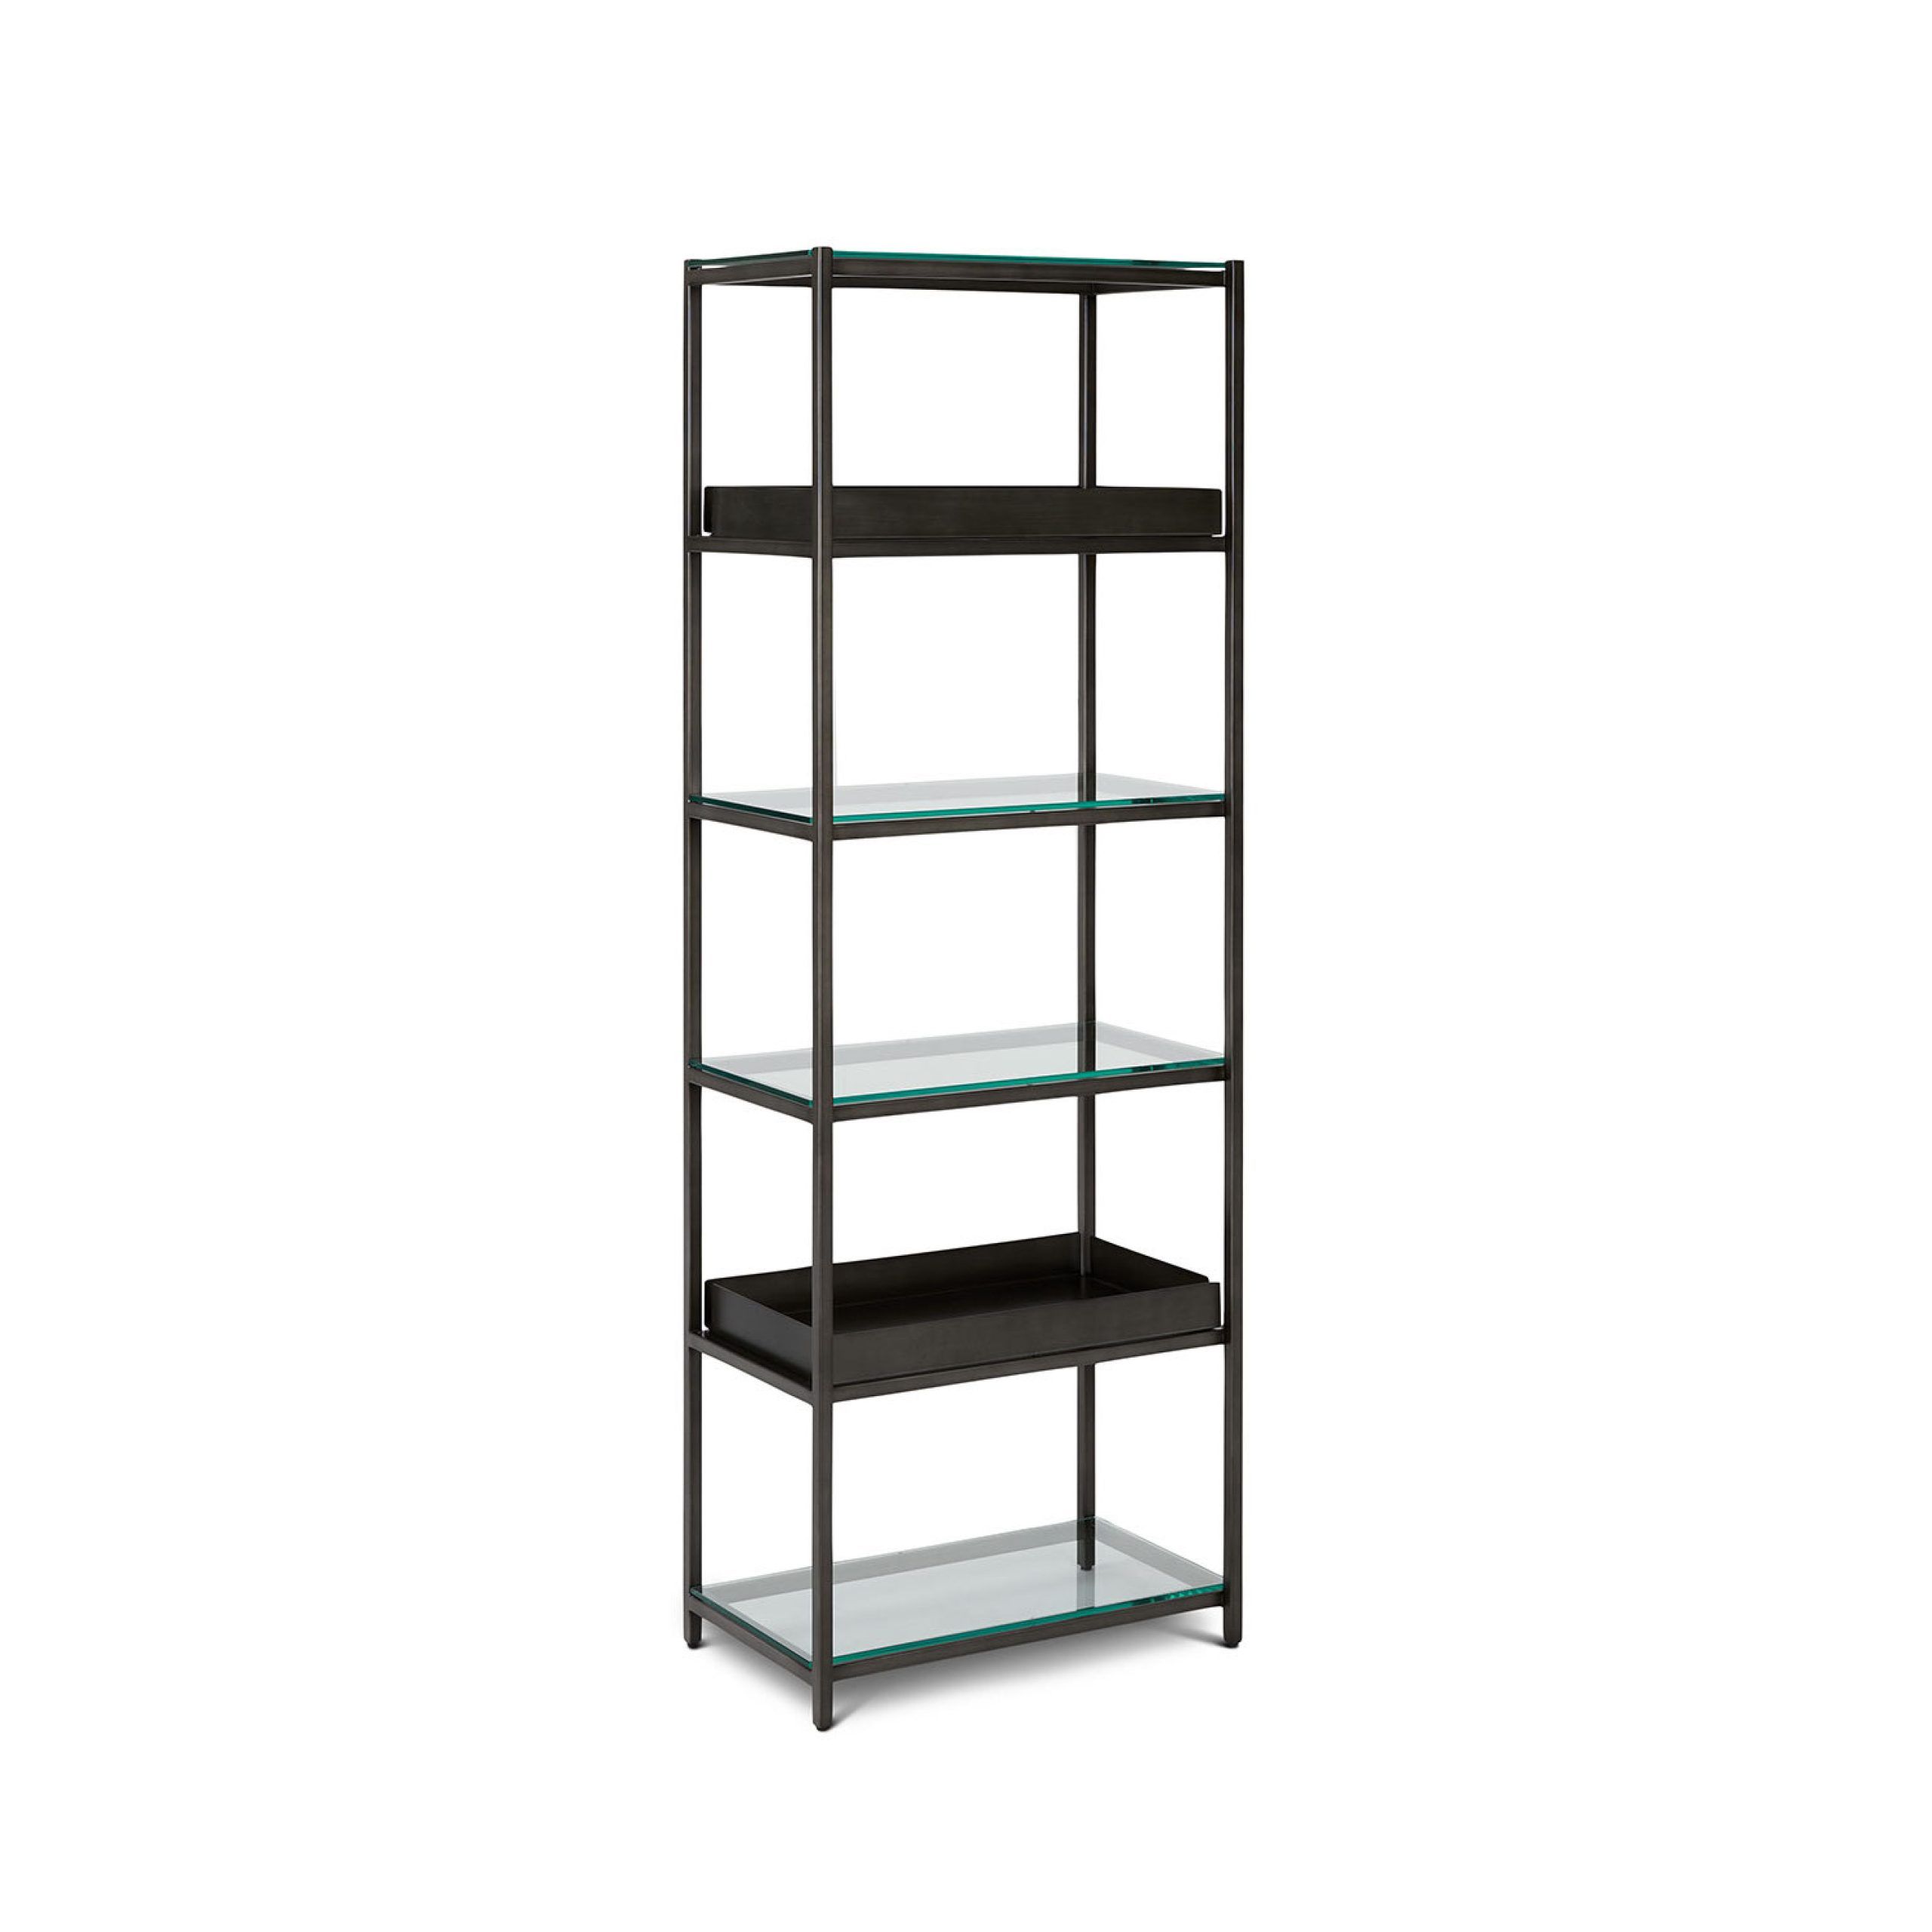 Lutto Gunmetal Gray Bookcase | Article With Regard To Gun Metal Black Bookcases (View 9 of 15)